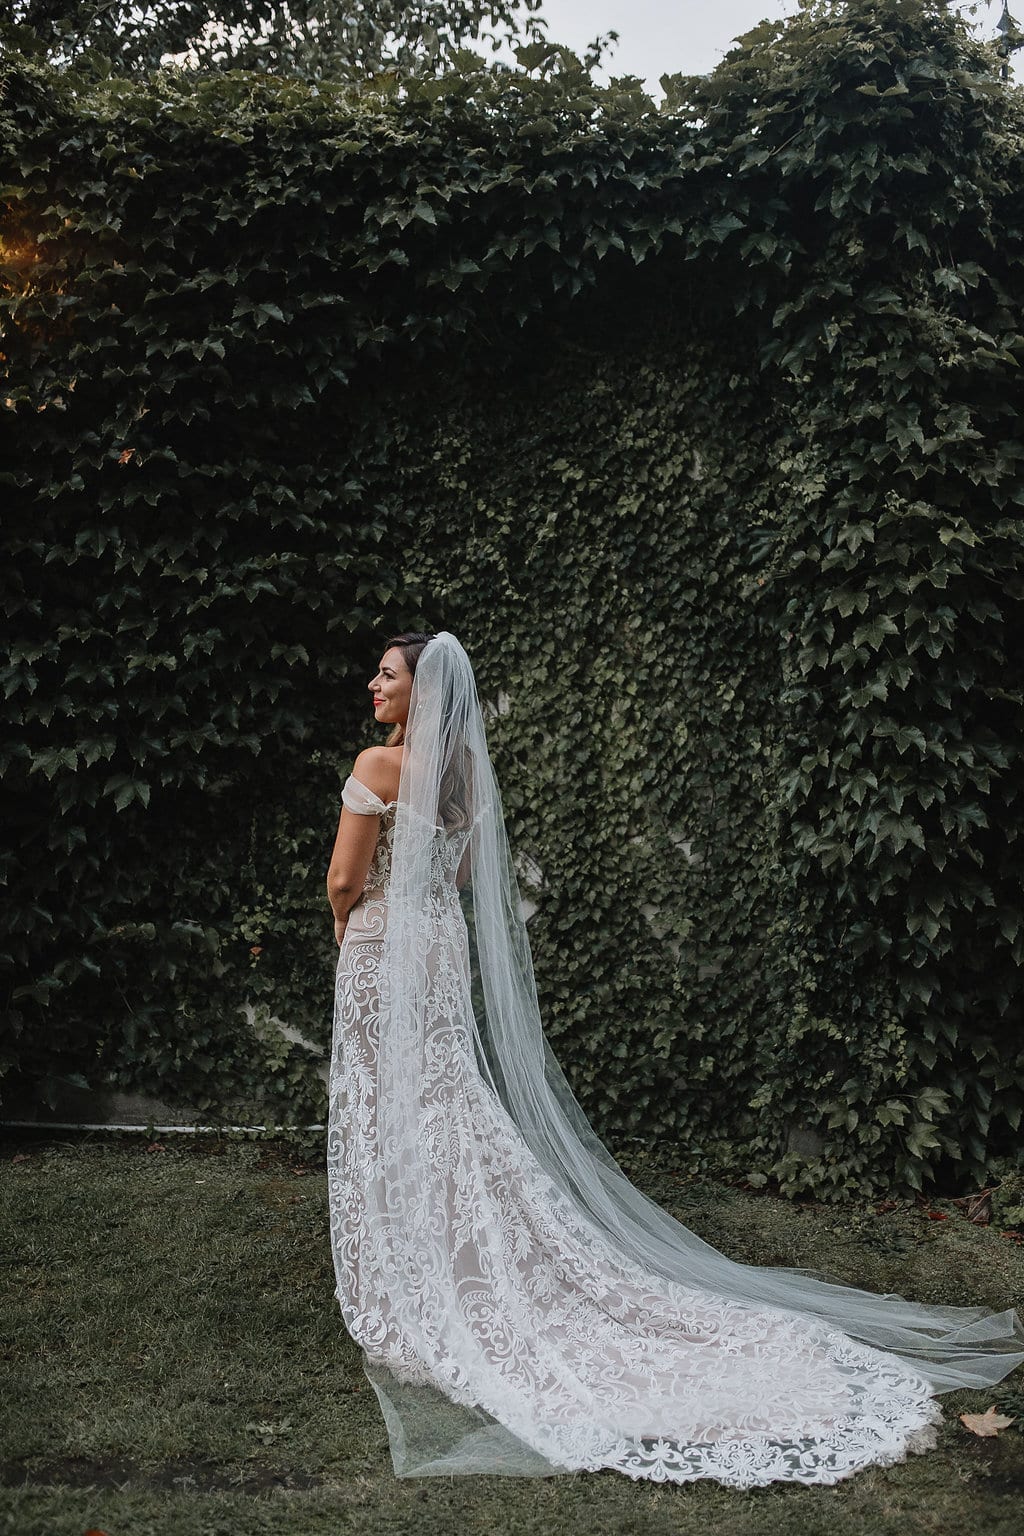 Real Weddings | Vinka Design | Real Brides Wearing Vinka Gowns | Amber and Rhys - Amber facing away with veil and off shoulder custom made dress and beautiful long train